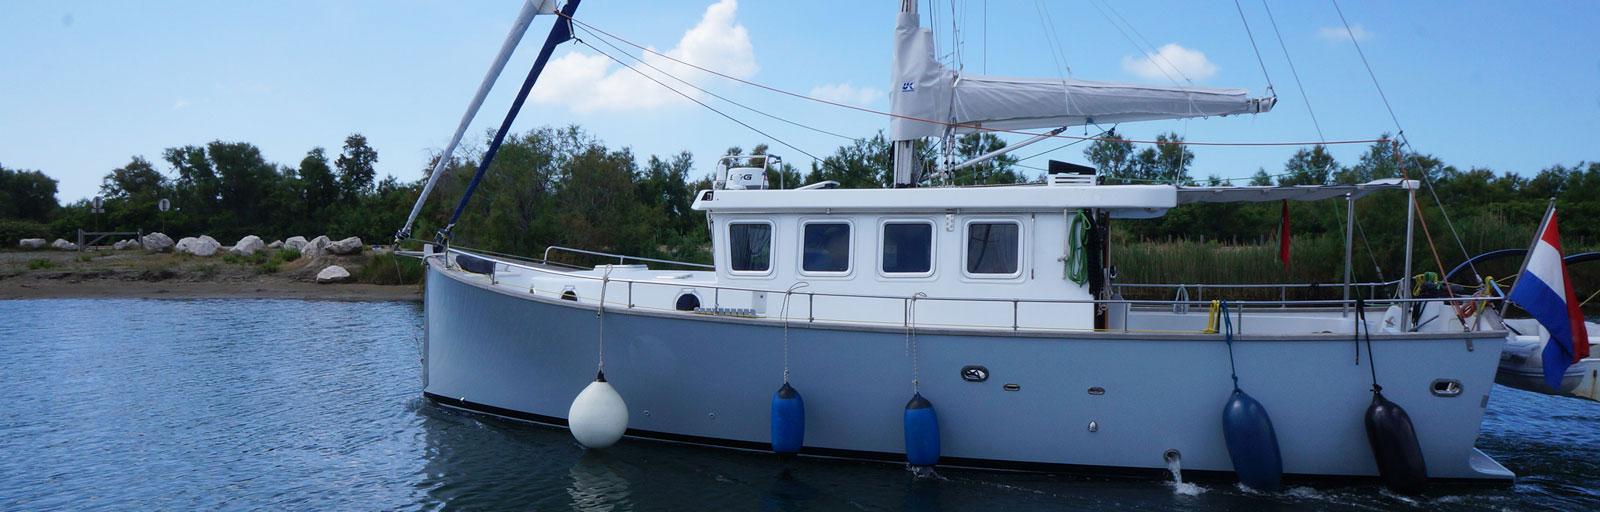 AYC Yachtbrokers - Trawler Fifty 38 JP Brouns